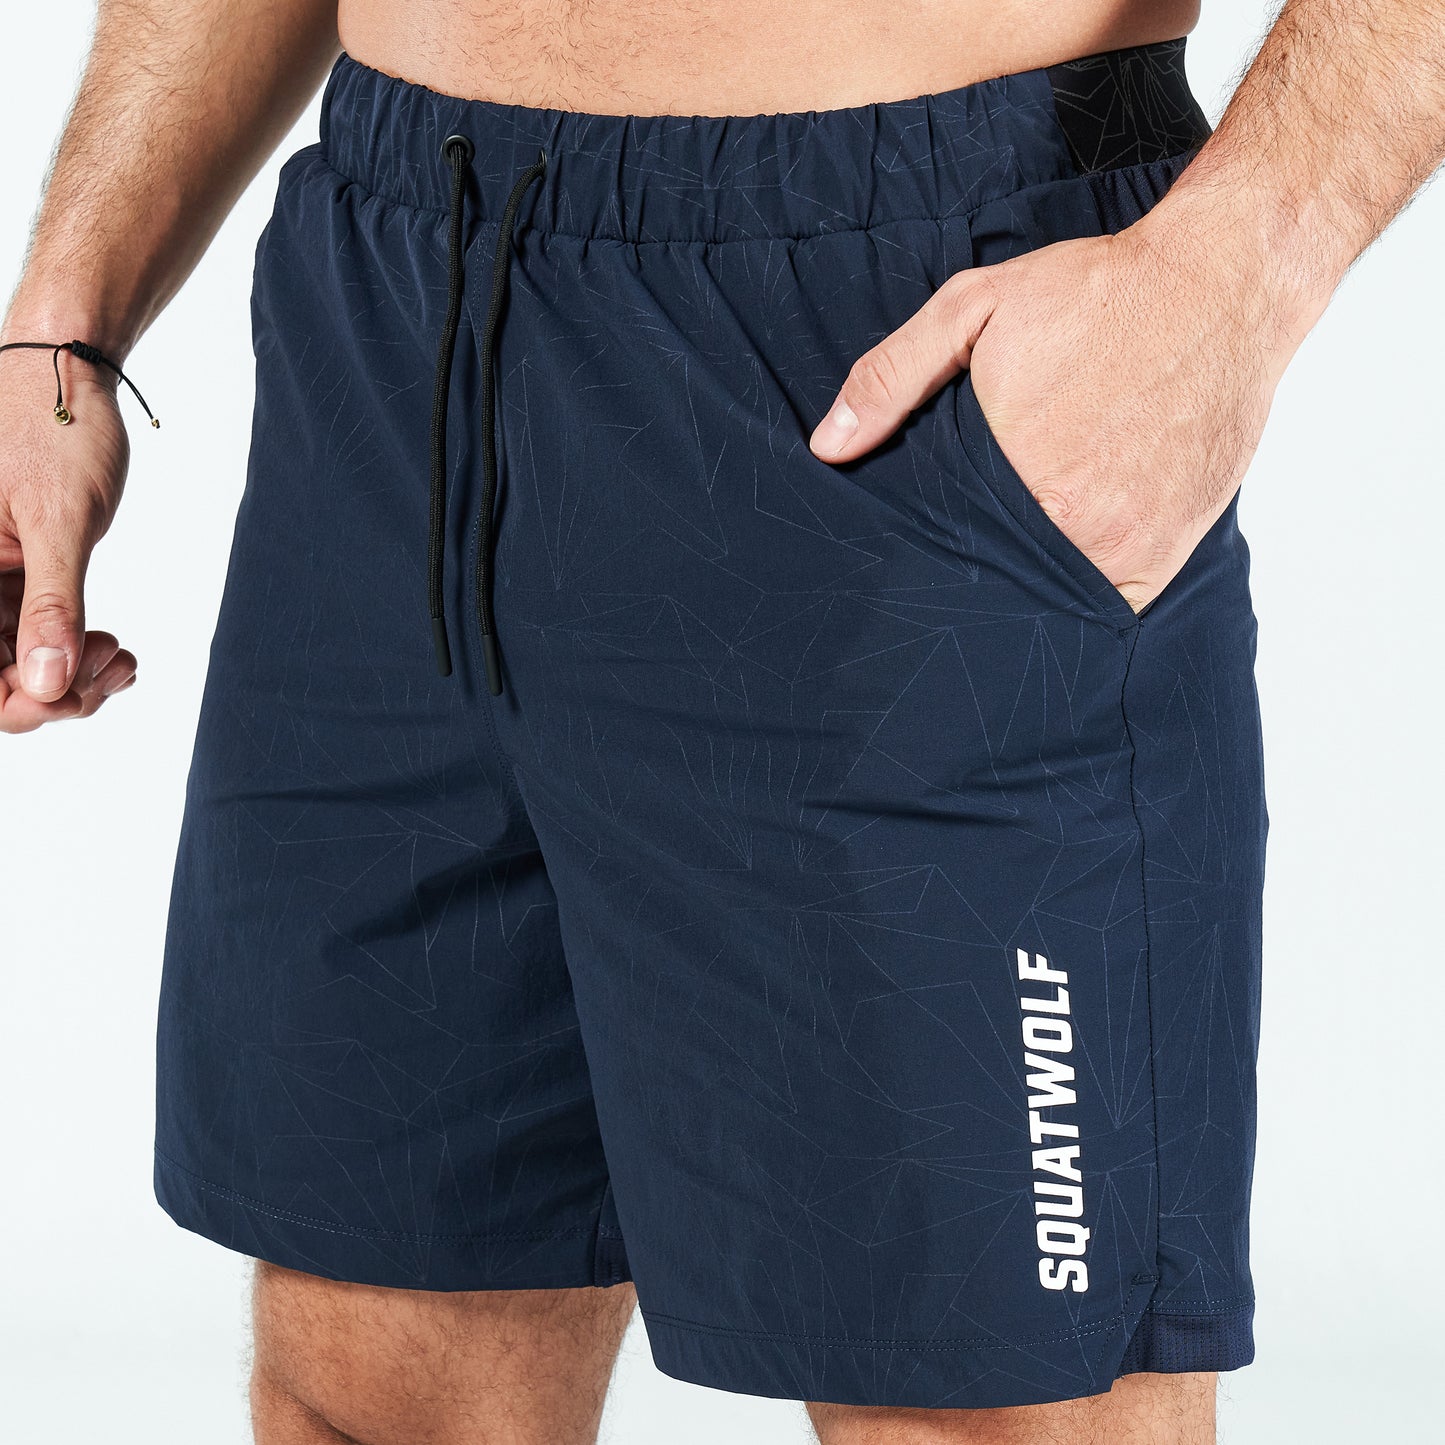 squatwolf-gym-wear-core-7-protech-2-in-1-shorts-navy-workout-short-for-men